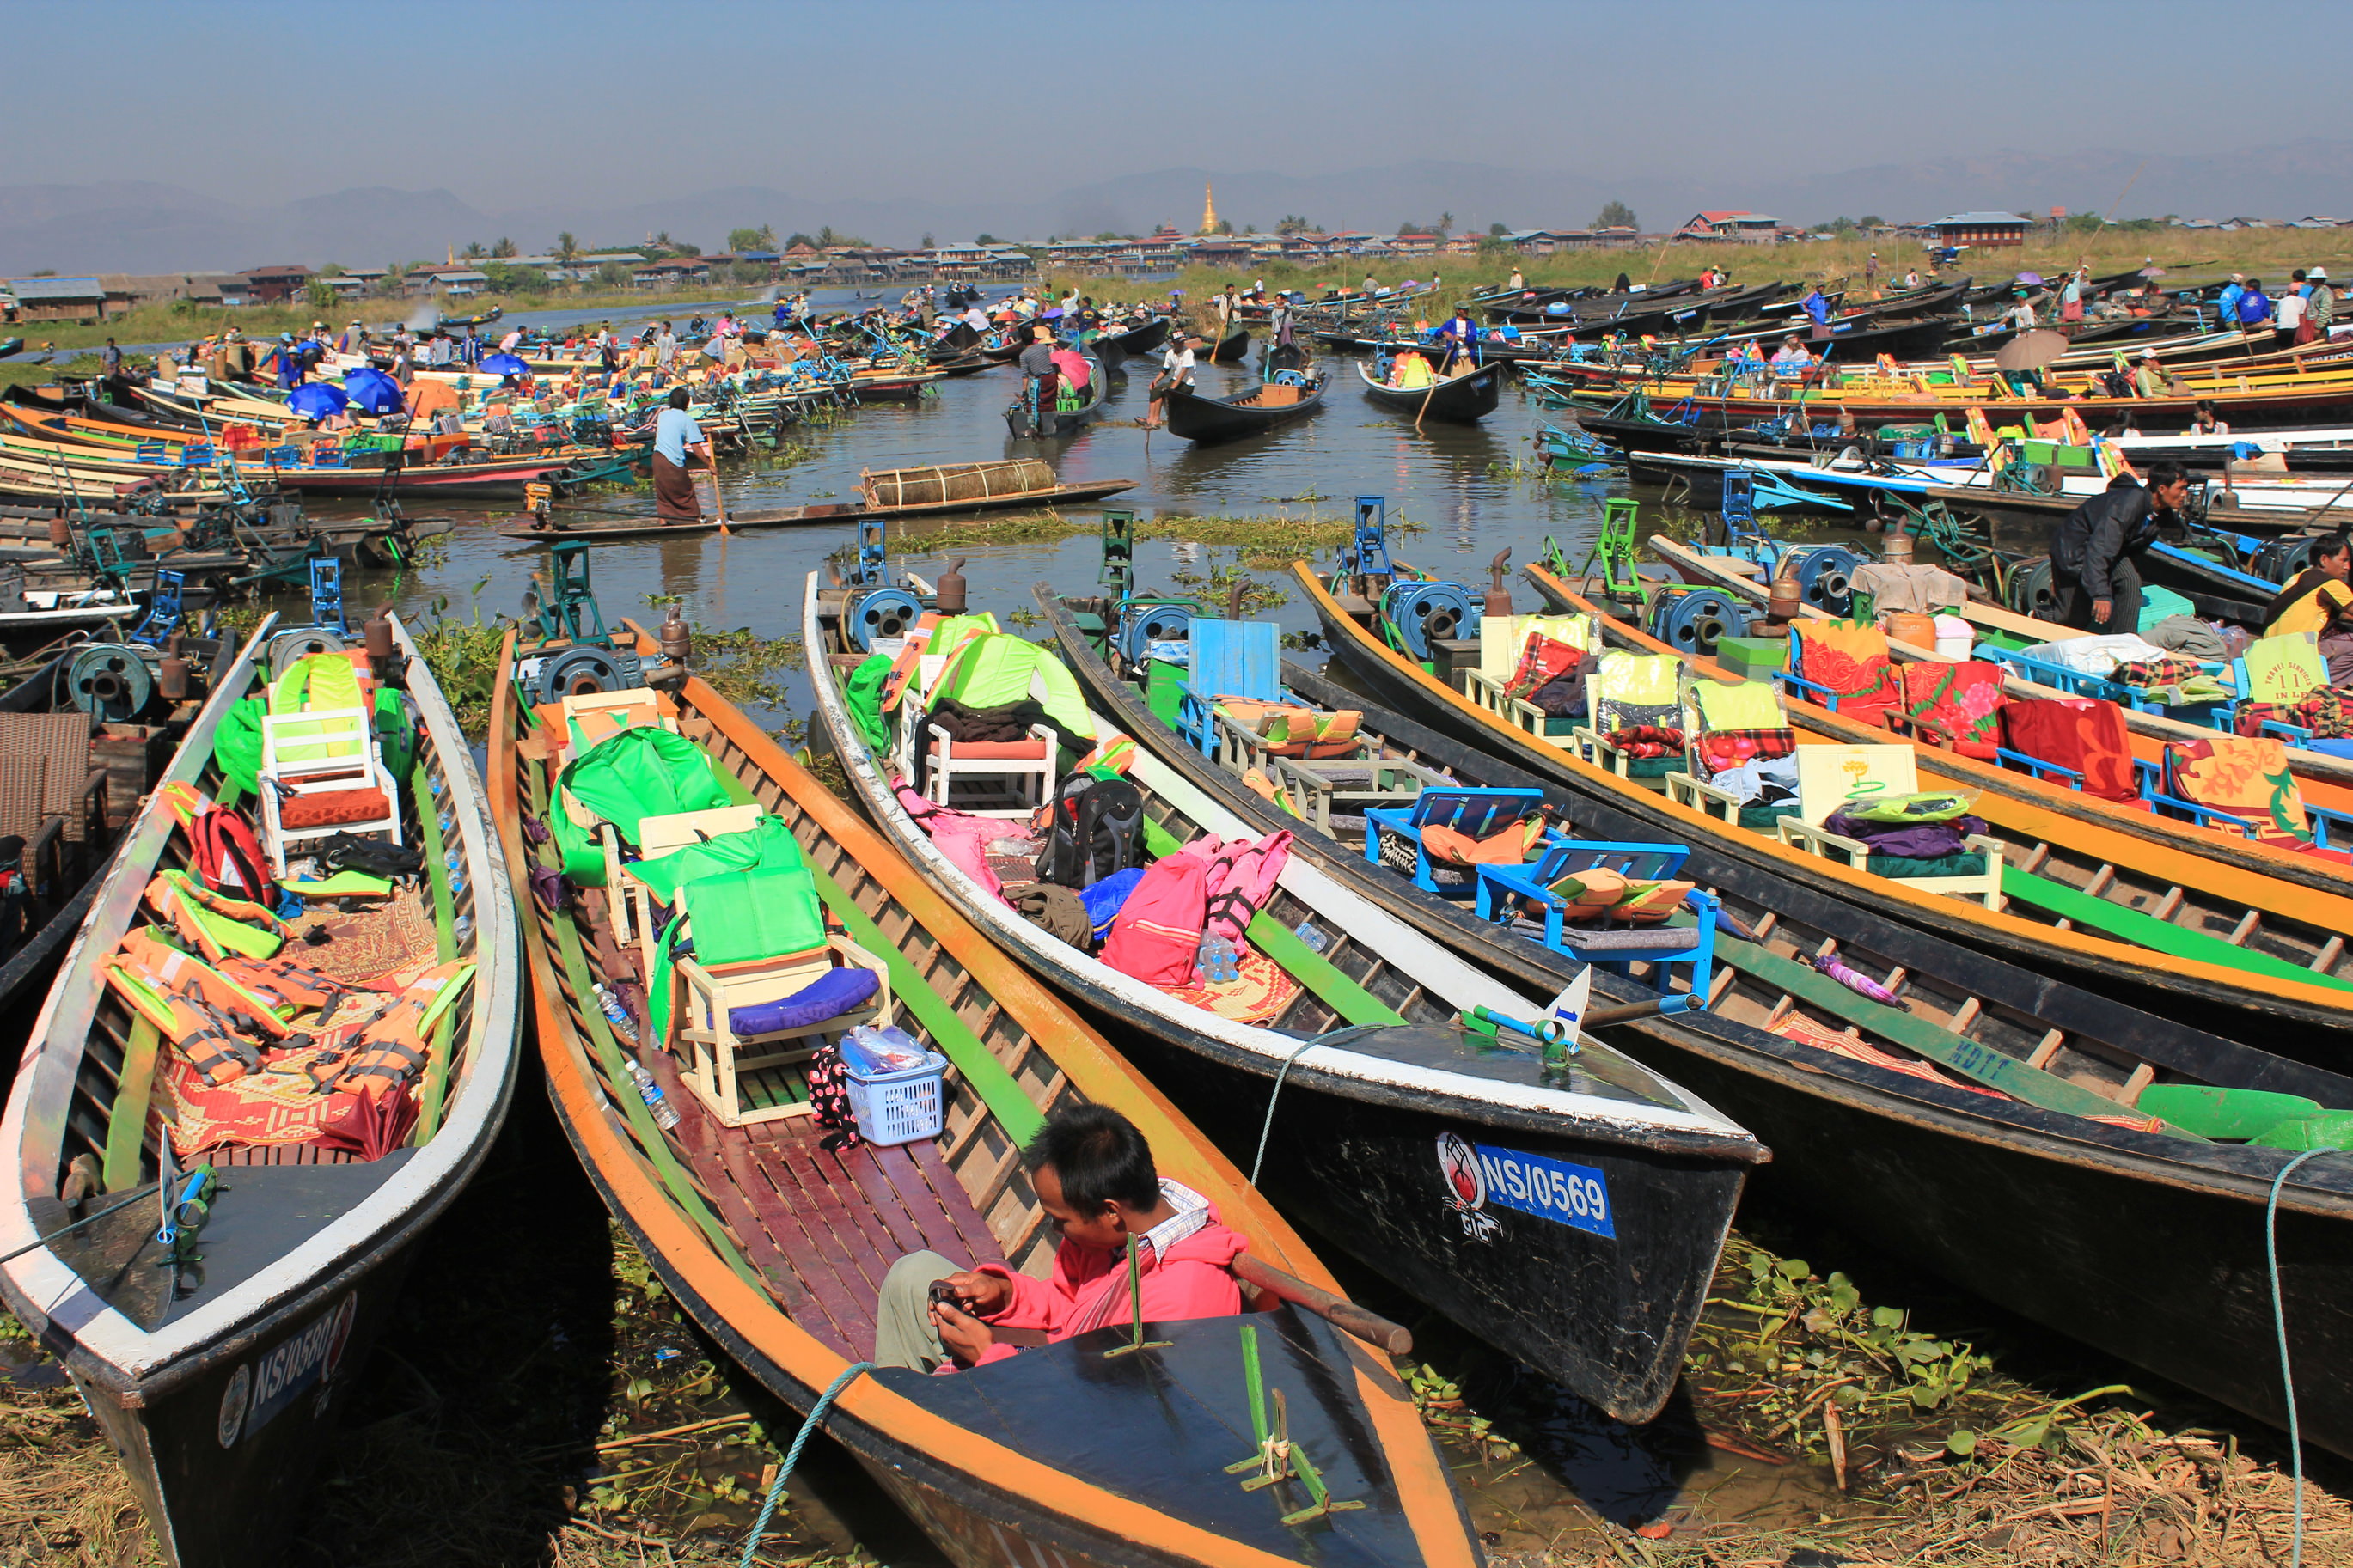 UK Trade and Investment publishes Opportunities for British oil and gas companies in Myanmar